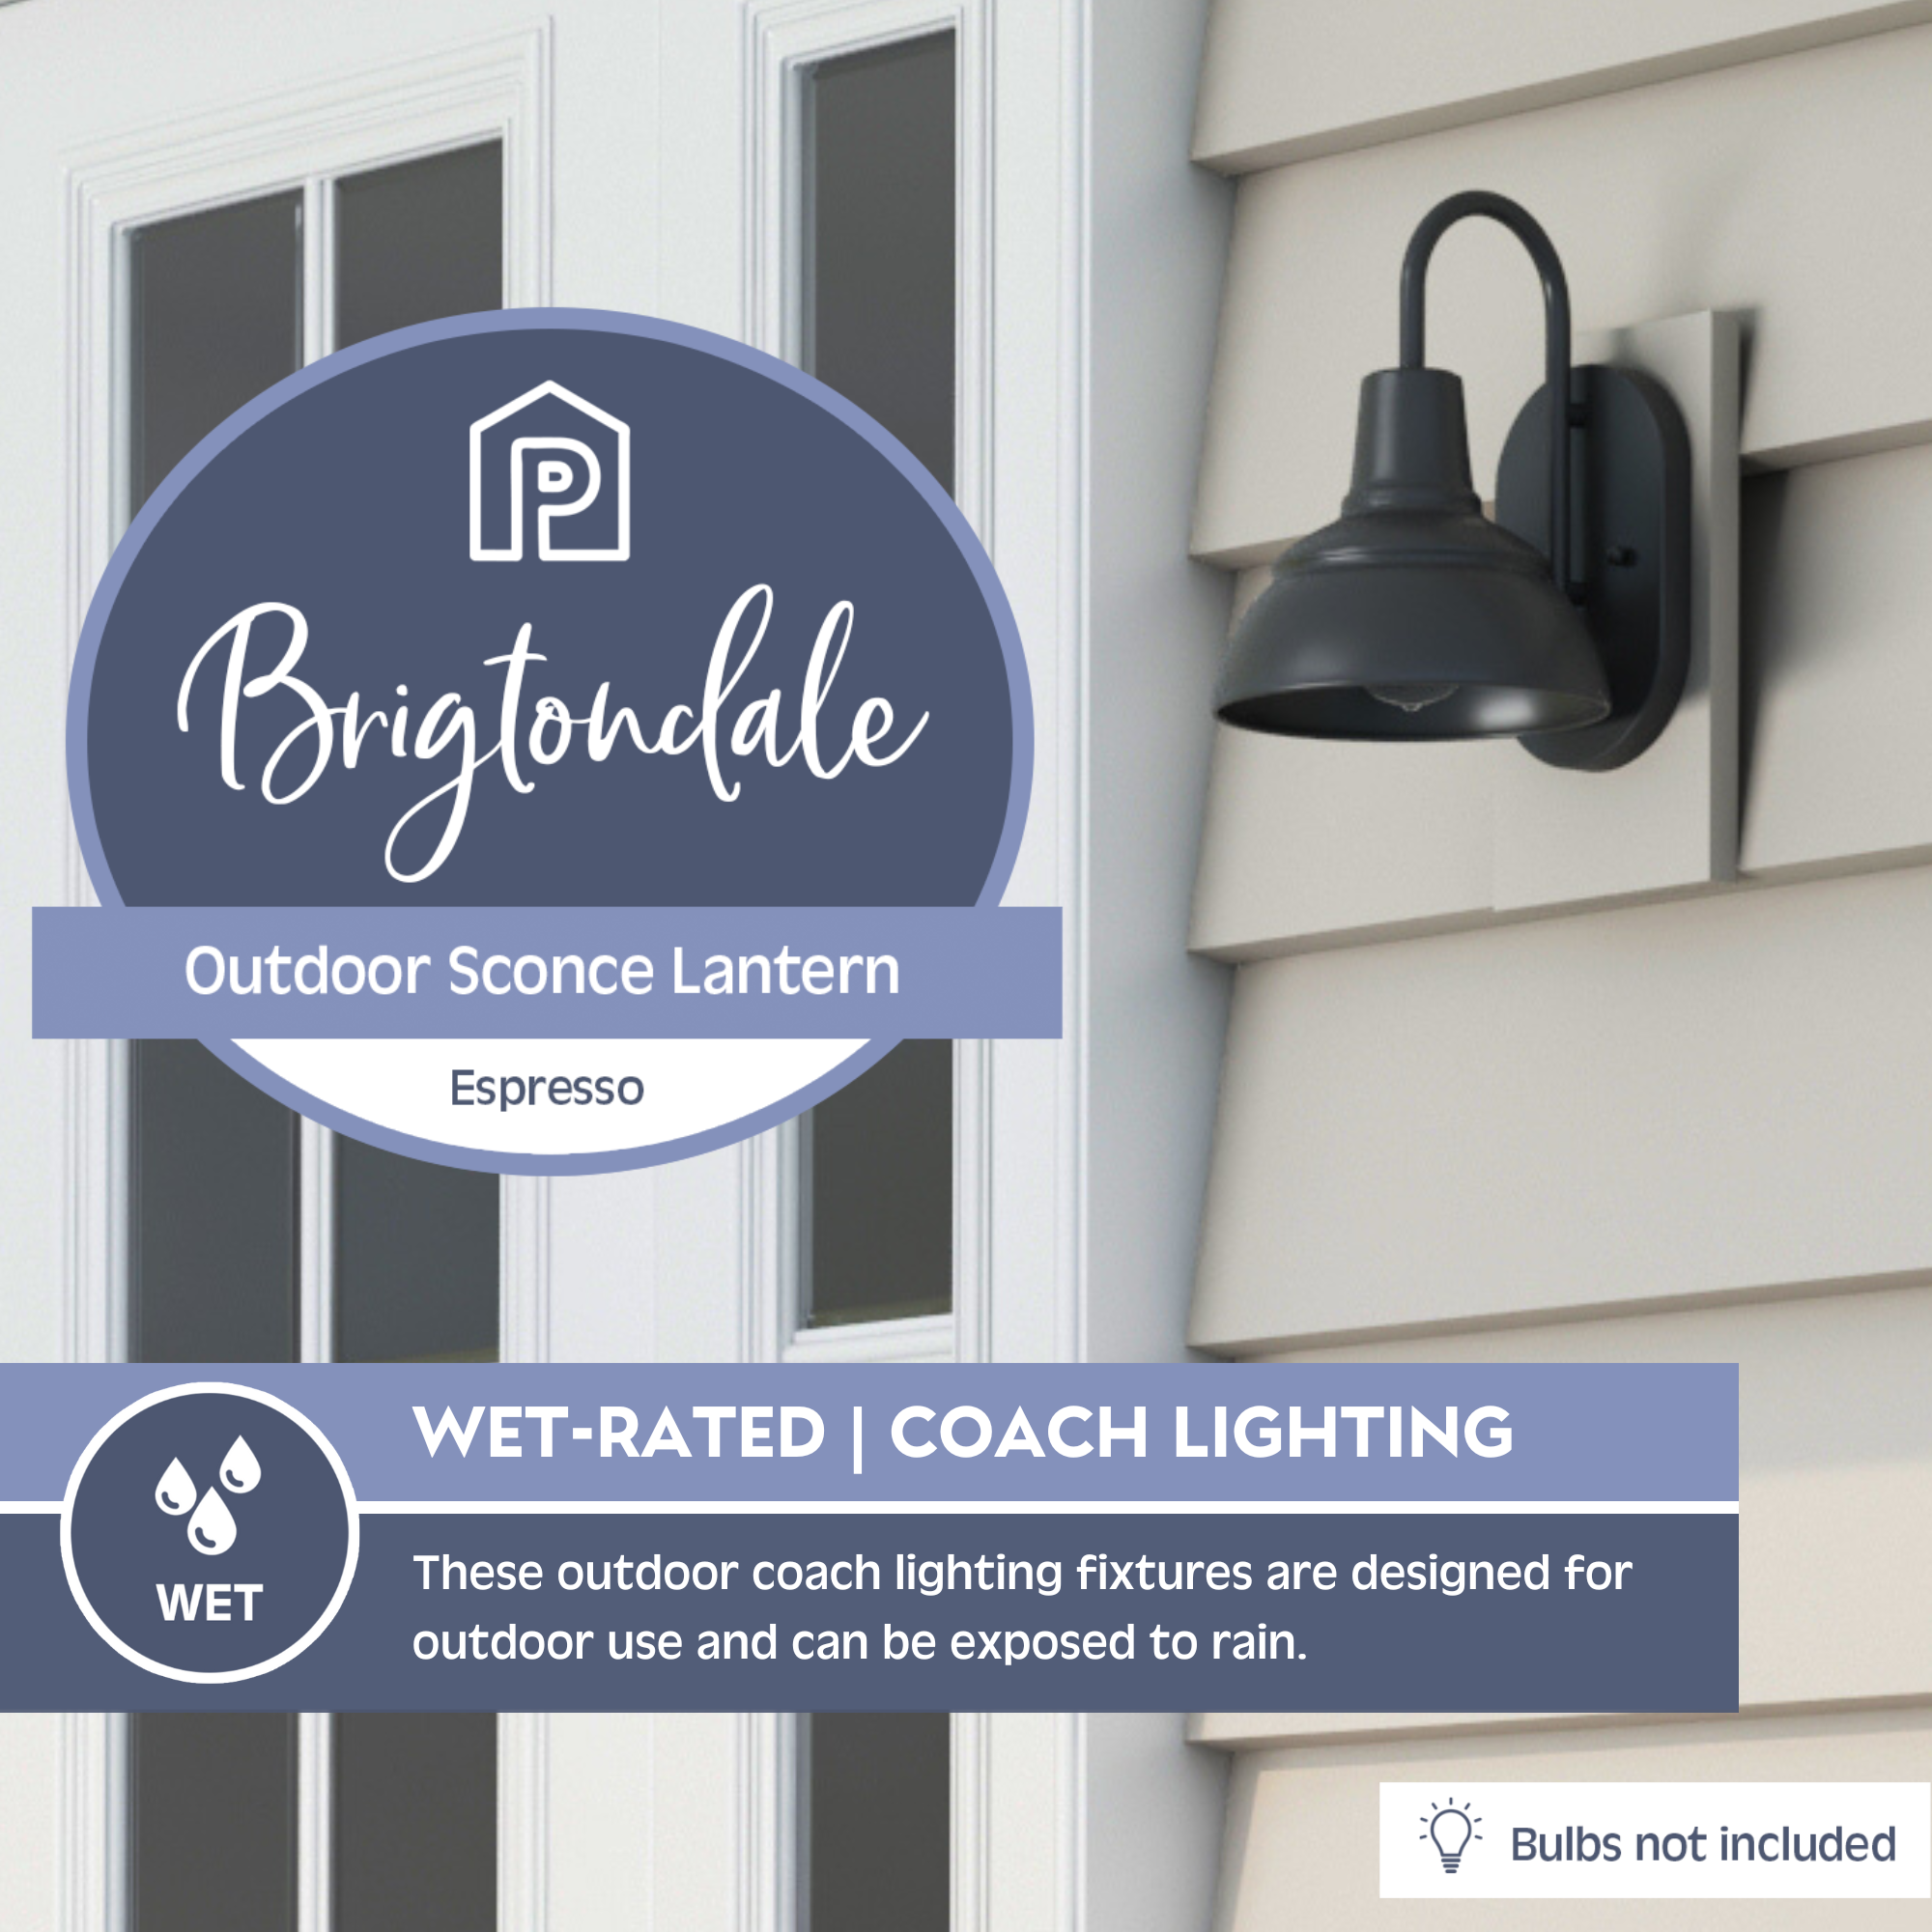 Brightondale, Wet-Rated Coach Light, Espresso by Prominence Home